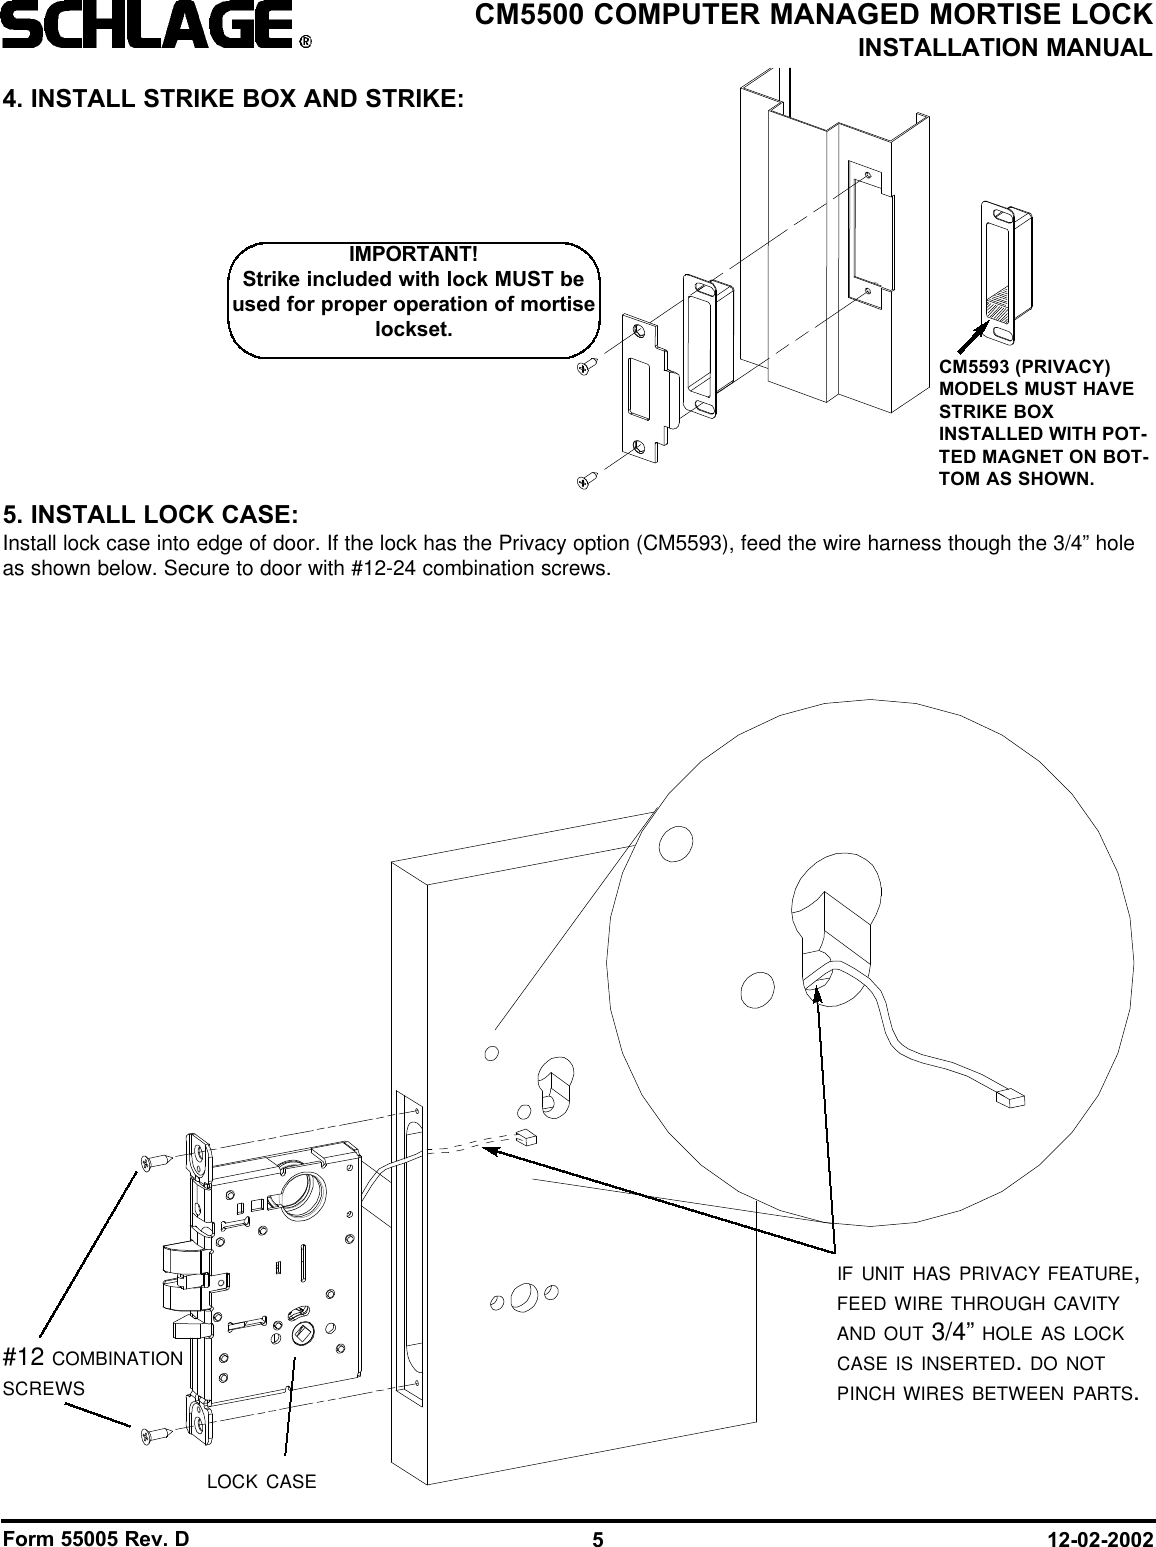 Form 55005 Rev. D 12-02-20025CM5500 COMPUTER MANAGED MORTISE LOCKINSTALLATION MANUALLOCK CASE#12 COMBINATIONSCREWSIF UNIT HAS PRIVACY FEATURE,FEED WIRE THROUGH CAVITYAND OUT 3/4” HOLE AS LOCKCASE IS INSERTED. DO NOTPINCH WIRES BETWEEN PARTS.4. INSTALL STRIKE BOX AND STRIKE:5. INSTALL LOCK CASE:Install lock case into edge of door. If the lock has the Privacy option (CM5593), feed the wire harness though the 3/4” holeas shown below. Secure to door with #12-24 combination screws.IMPORTANT!Strike included with lock MUST beused for proper operation of mortiselockset.CM5593 (PRIVACY)MODELS MUST HAVESTRIKE BOXINSTALLED WITH POT-TED MAGNET ON BOT-TOM AS SHOWN.